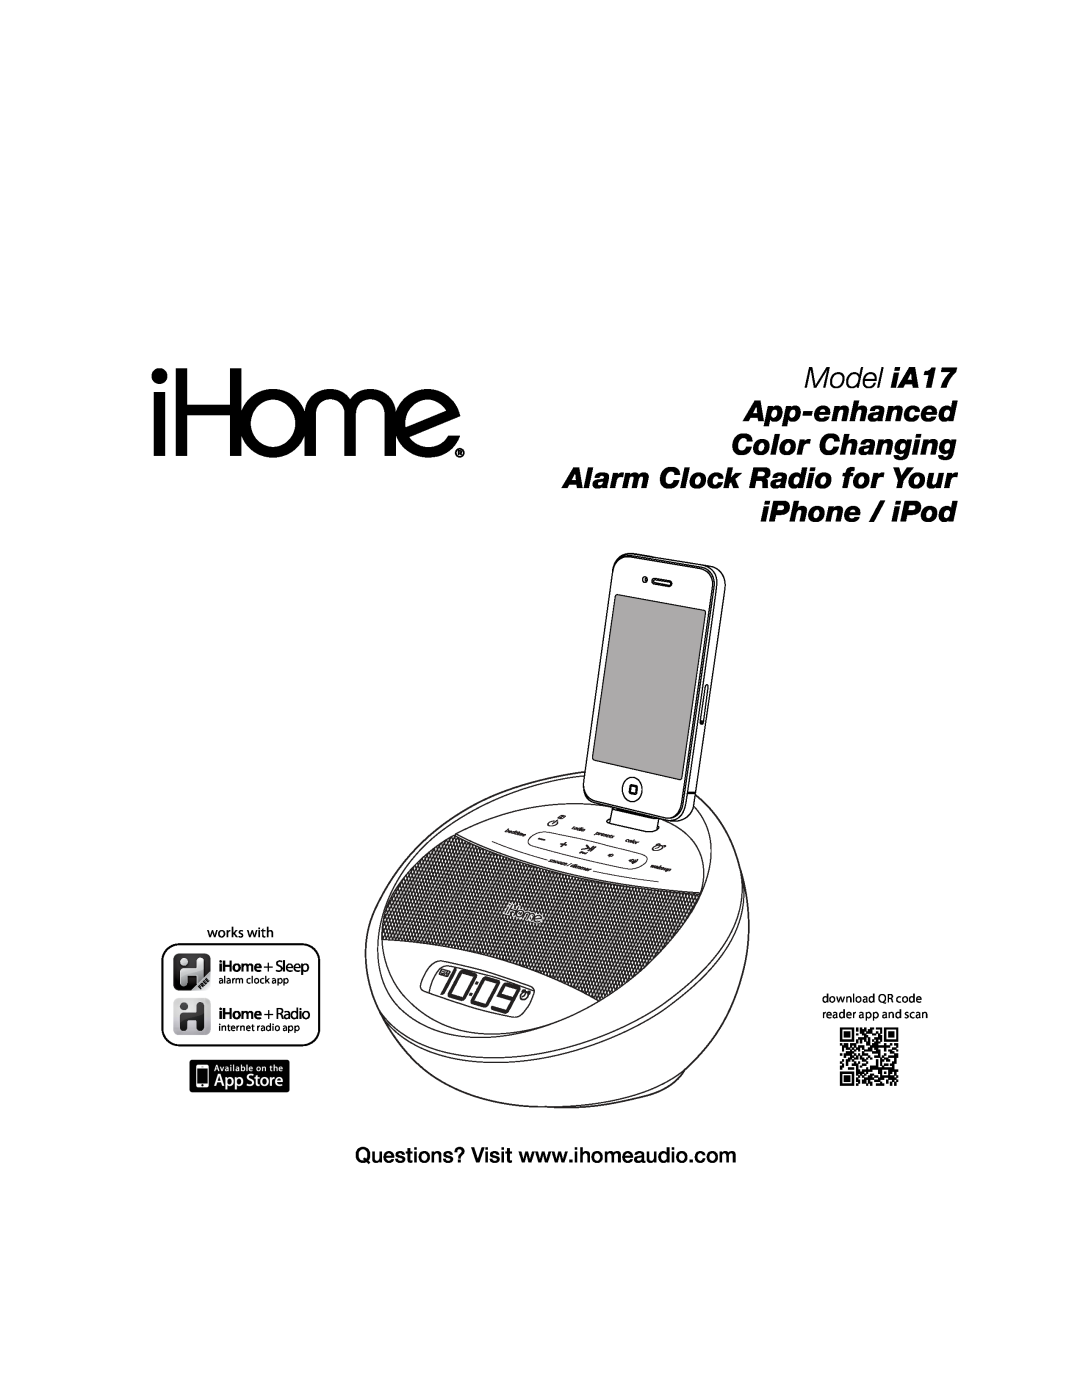 iHome instruction manual Model iA17, App-enhanced Color Changing Alarm Clock Radio for Your iPhone / iPod, works with 